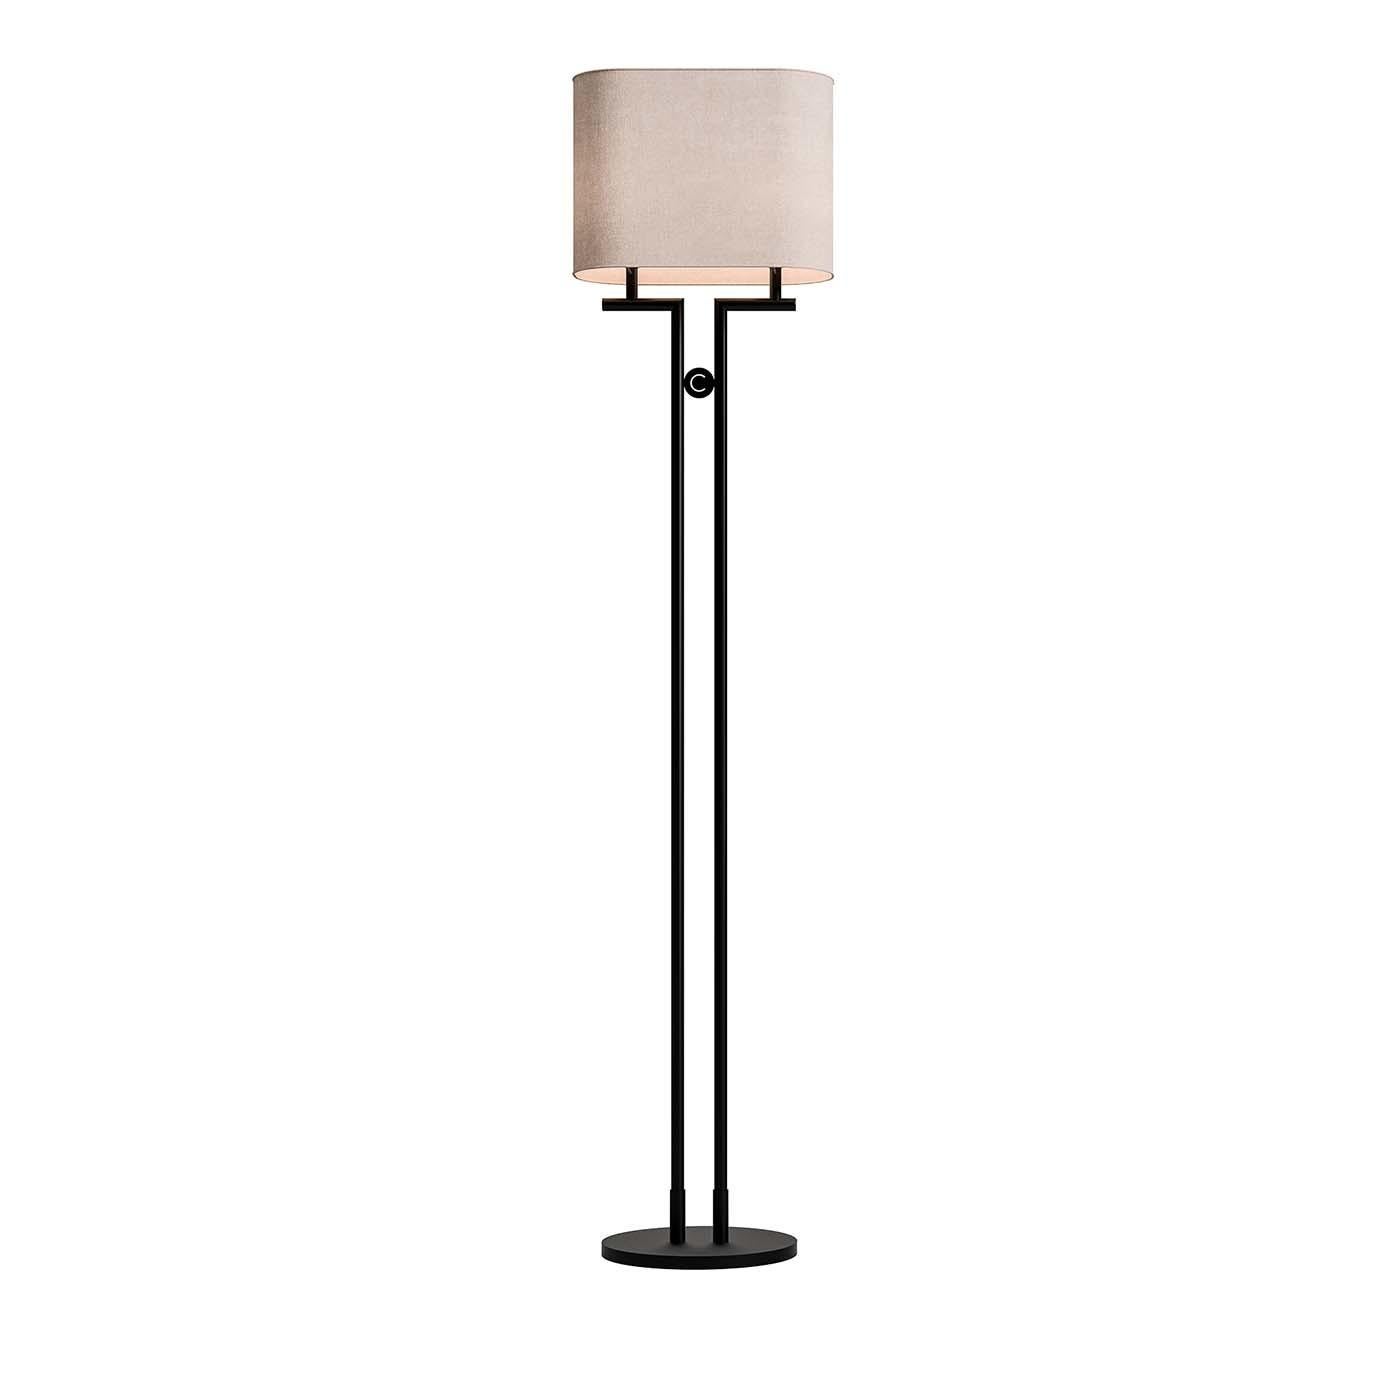 Defined by its crisp, clean lines, this stunning floor lamp brings a touch of modern style as it brightens any interior. Topped with a white fabric drum shade, the black-finished metal body comprises a round plate base and two slender rods with an